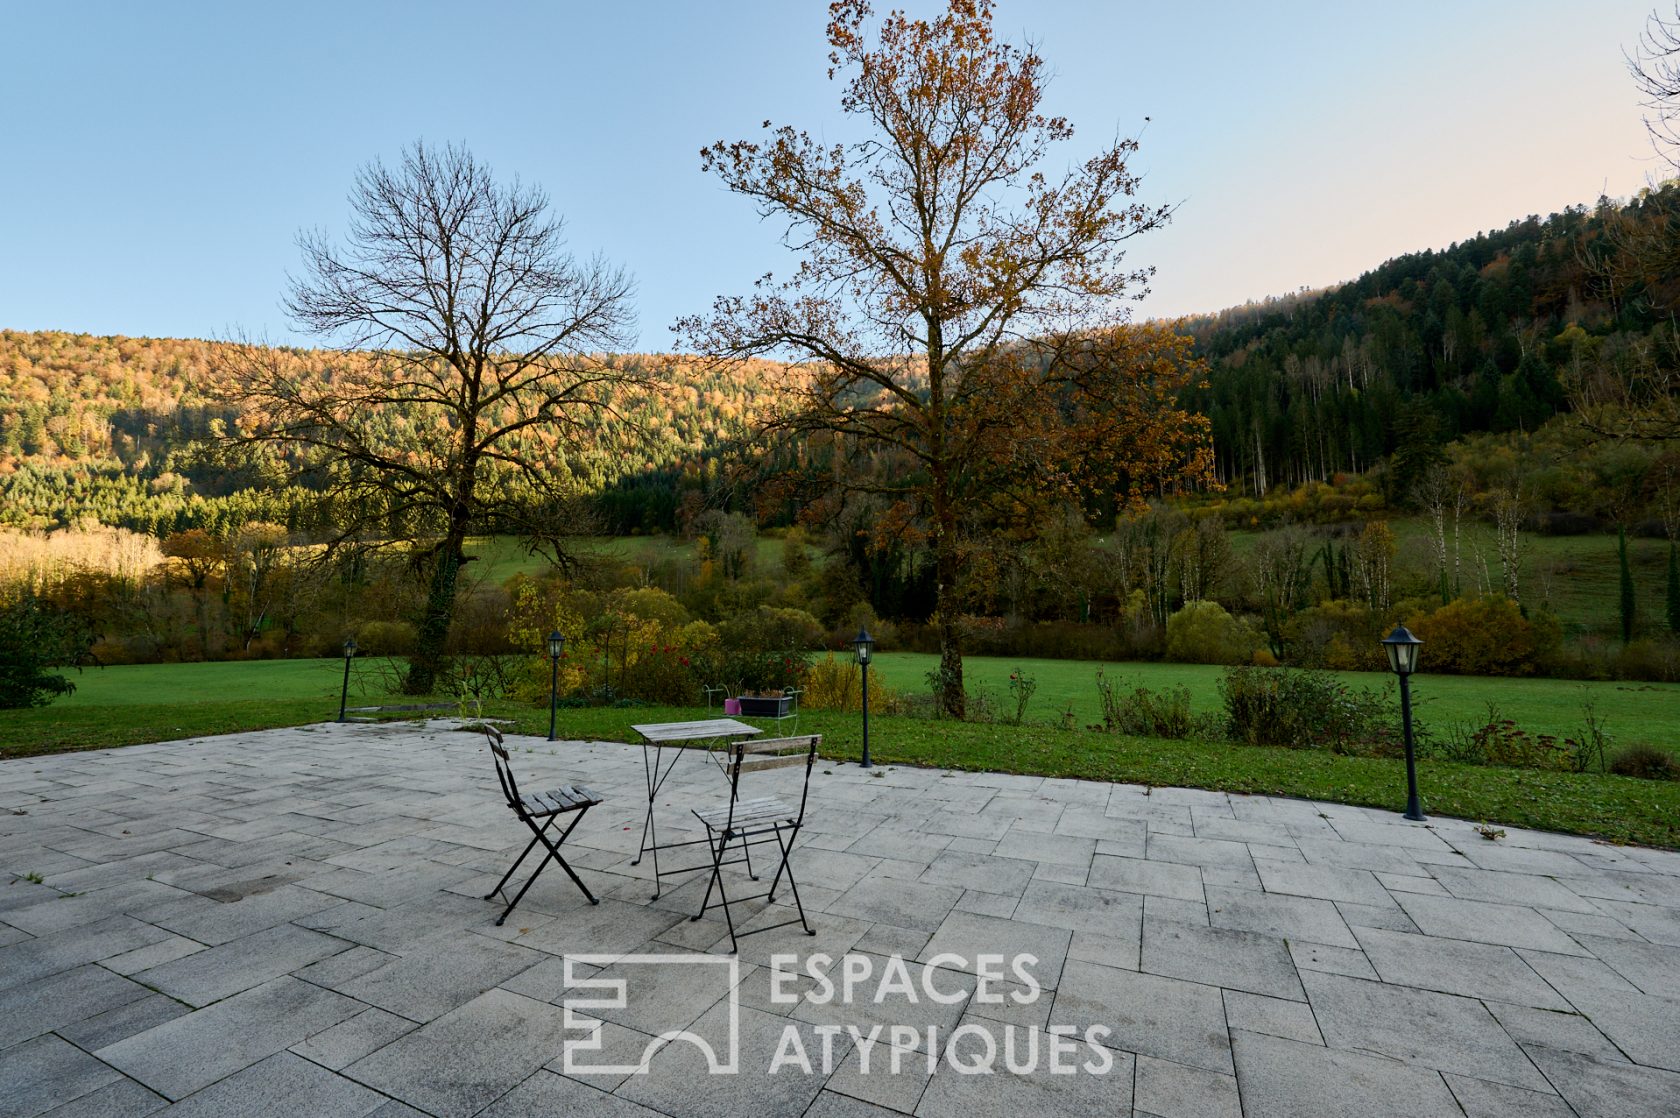 Dessoubre Valley – Comtoise house with peaceful view, a few steps from the river